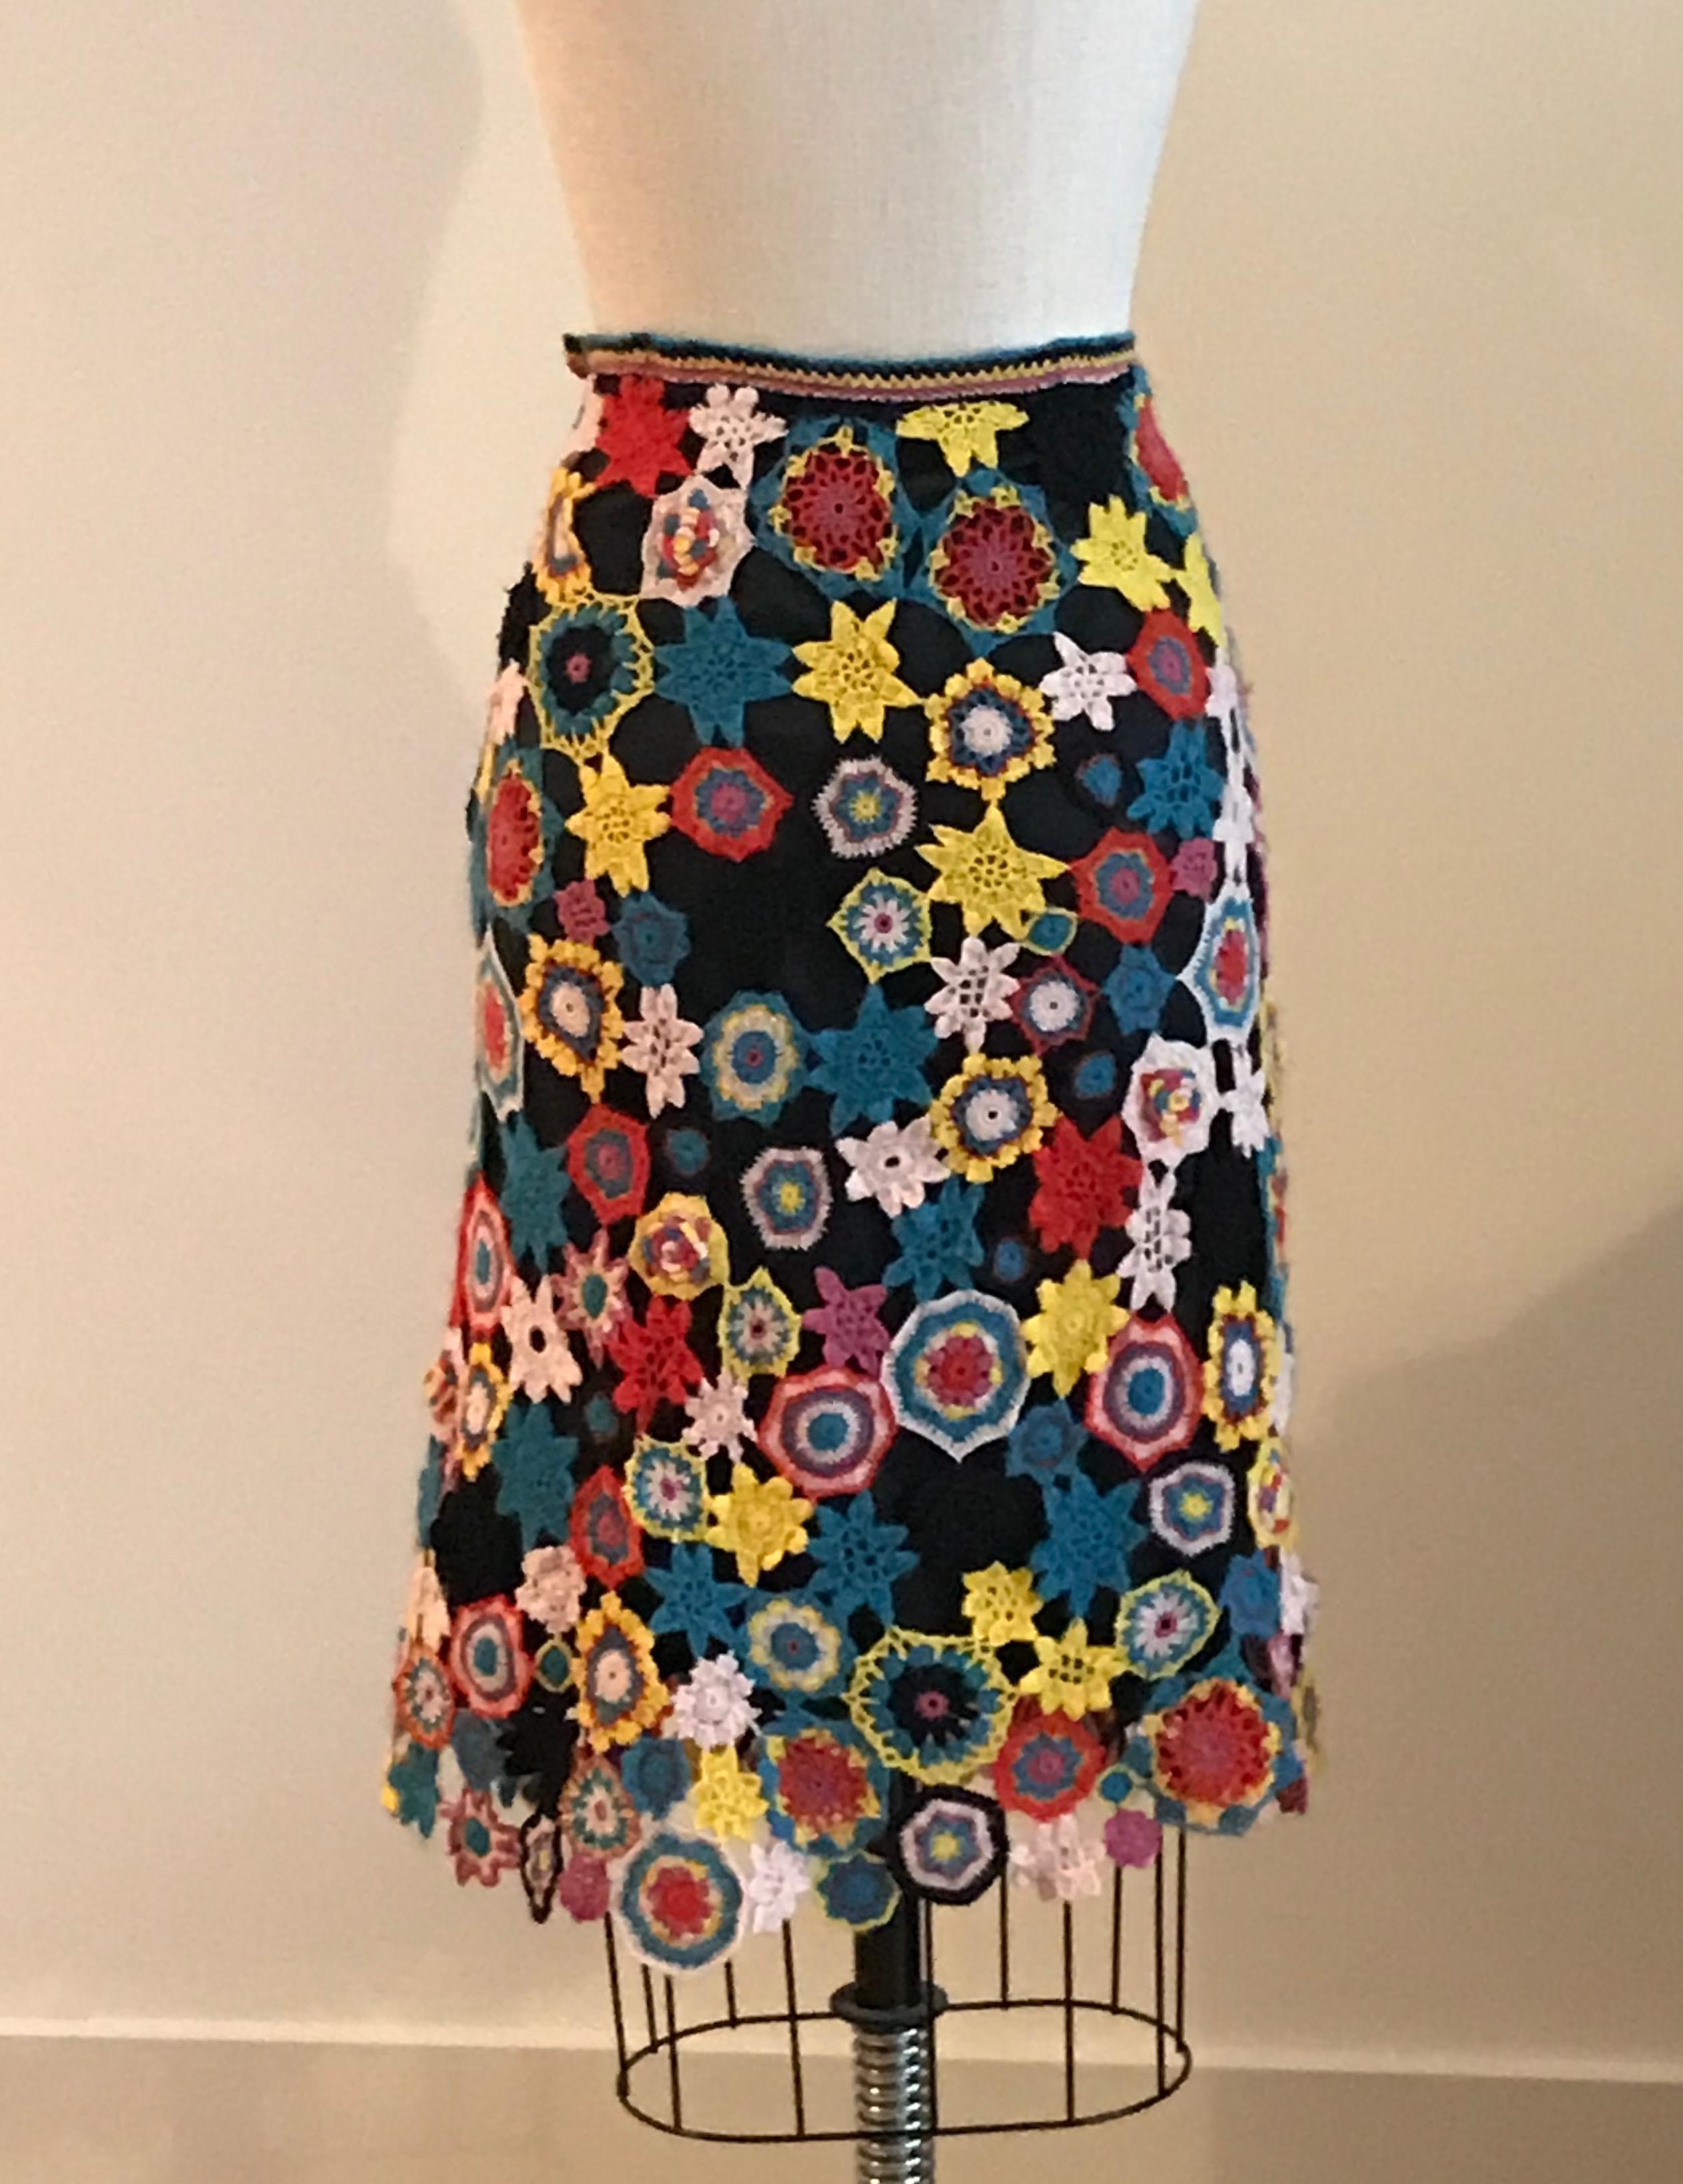 Christian Lacroix retro 1970's inspired crochet patchwork skirt in vibrant tones of red, pink, blue, and yellow on a black background. Open work crochet with attached black slip underneath. Side zip and button. 

100% wool. 
Lining feels like